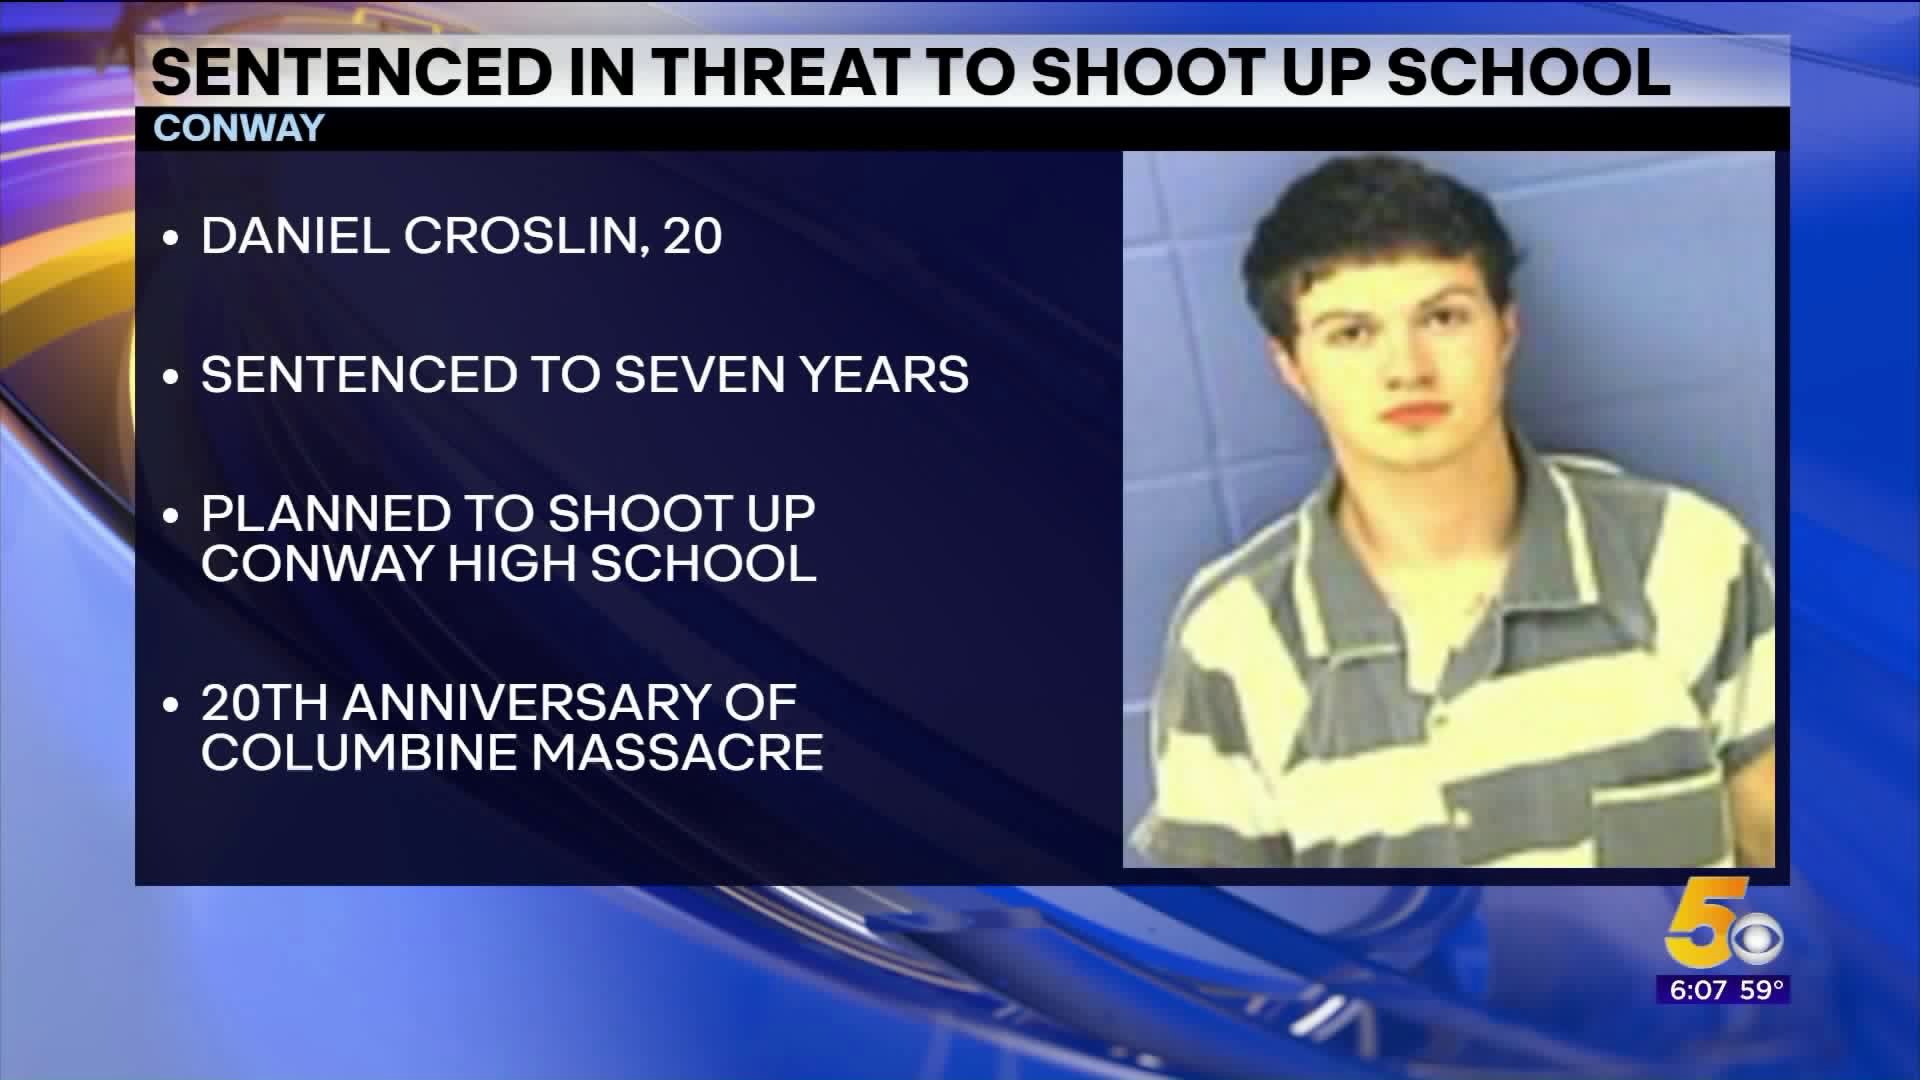 Conway Man Sentenced In Threat To Shoot Up High School